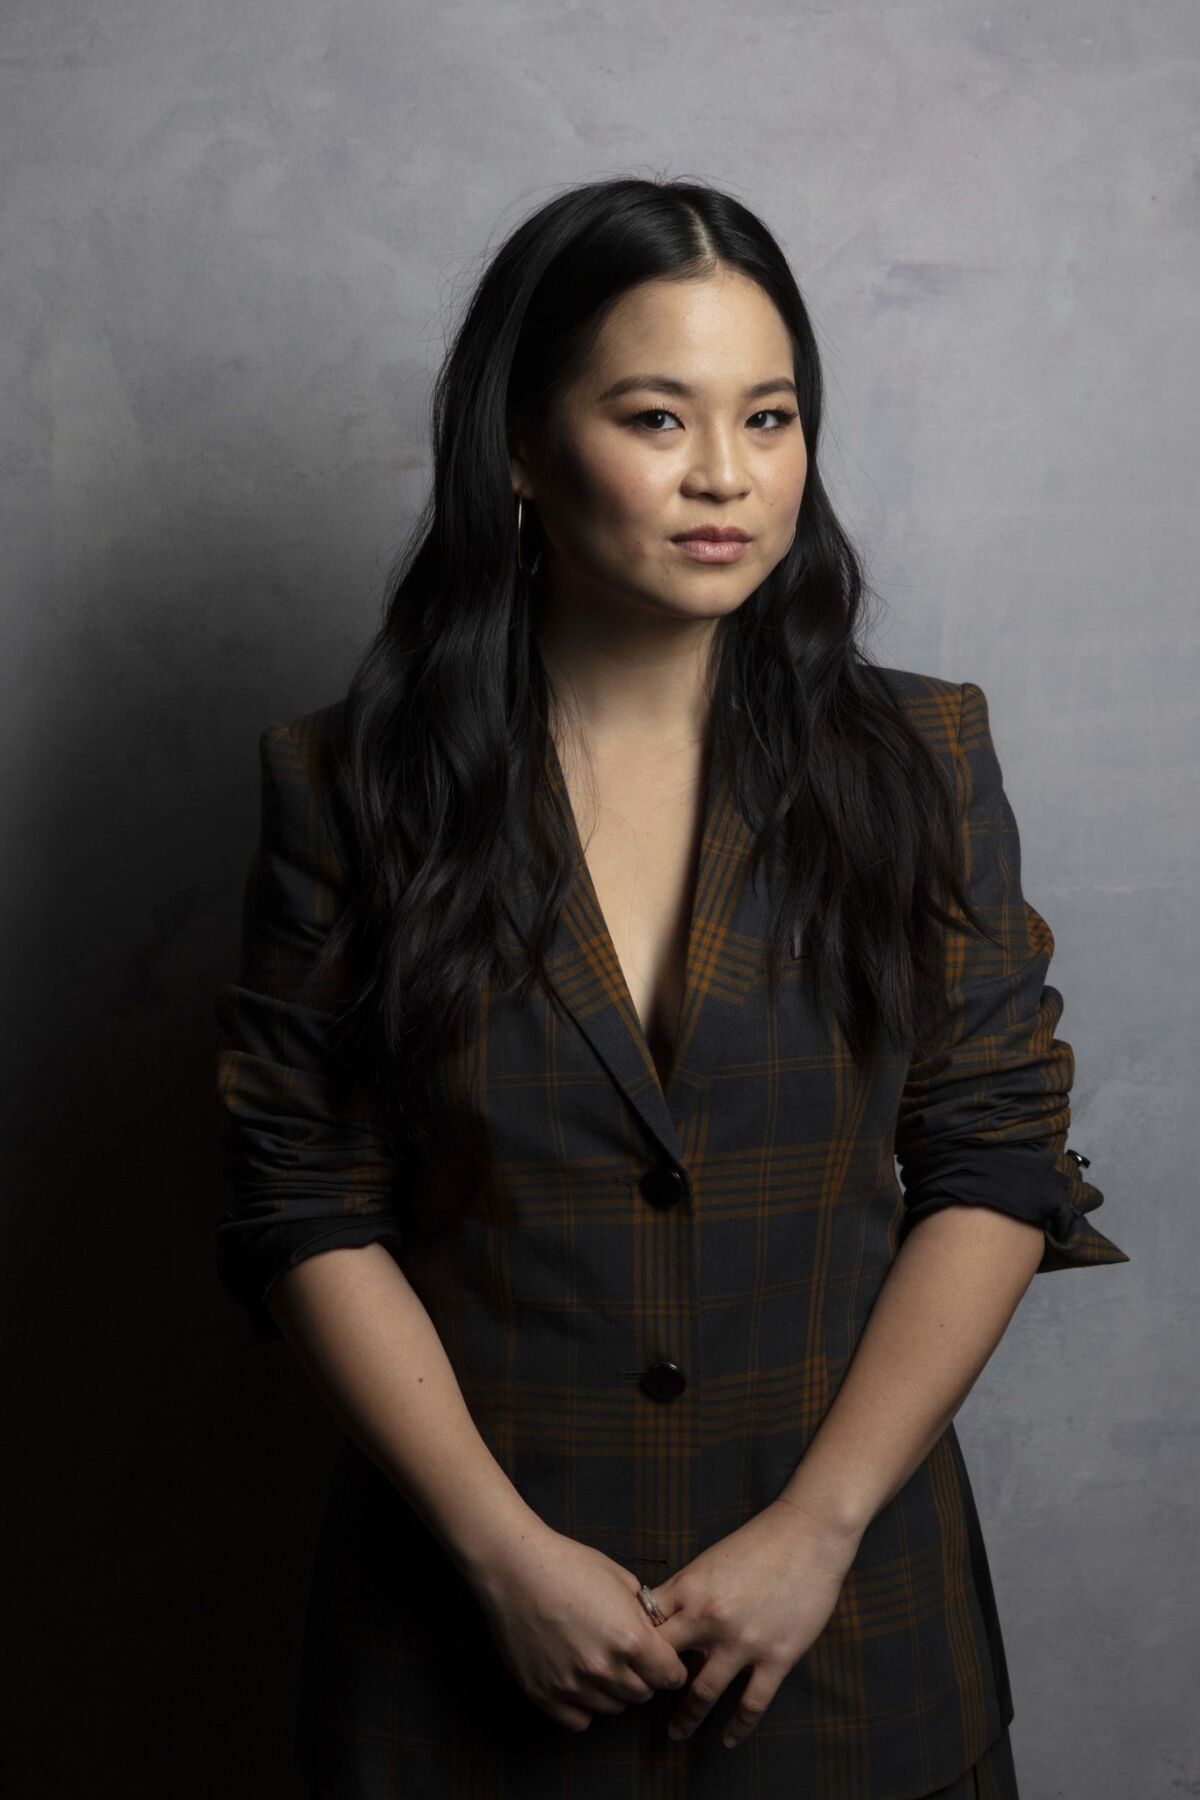 Actress Kelly Marie Tran from the television series "Sorry For Your Loss."